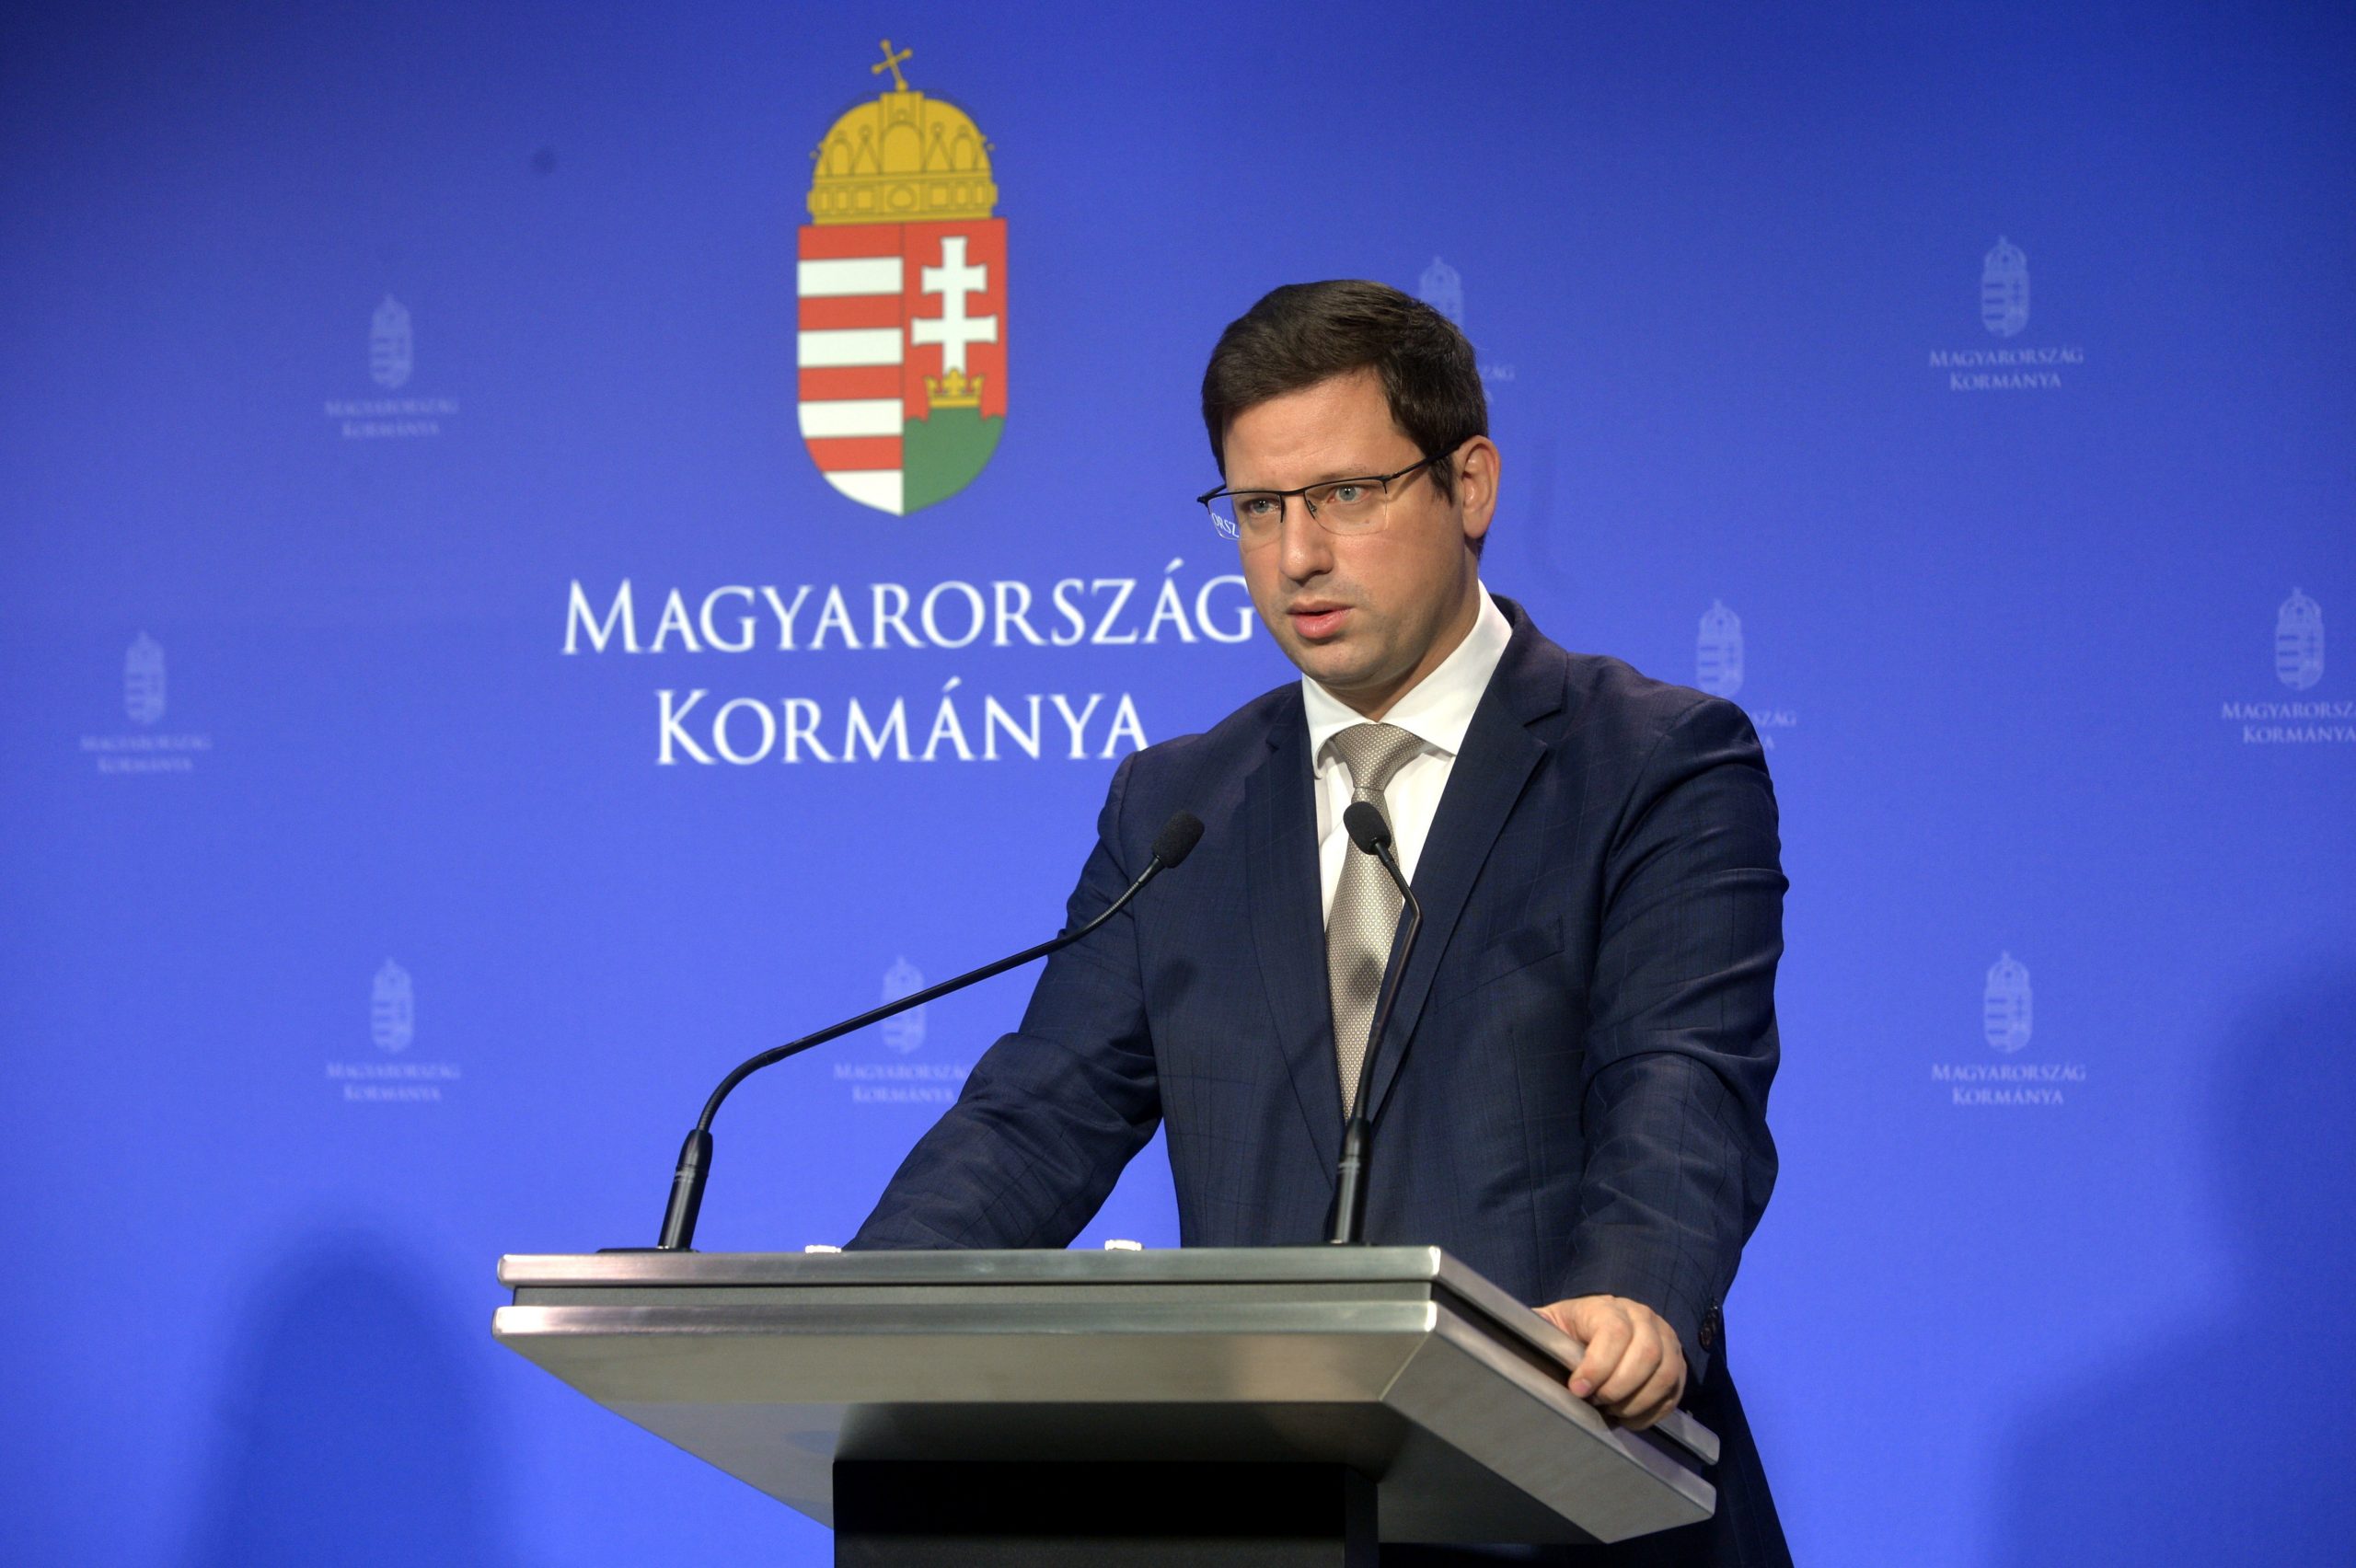 PMO Head: Constitutional Court and Not CJEU Defines Limits of EU Law